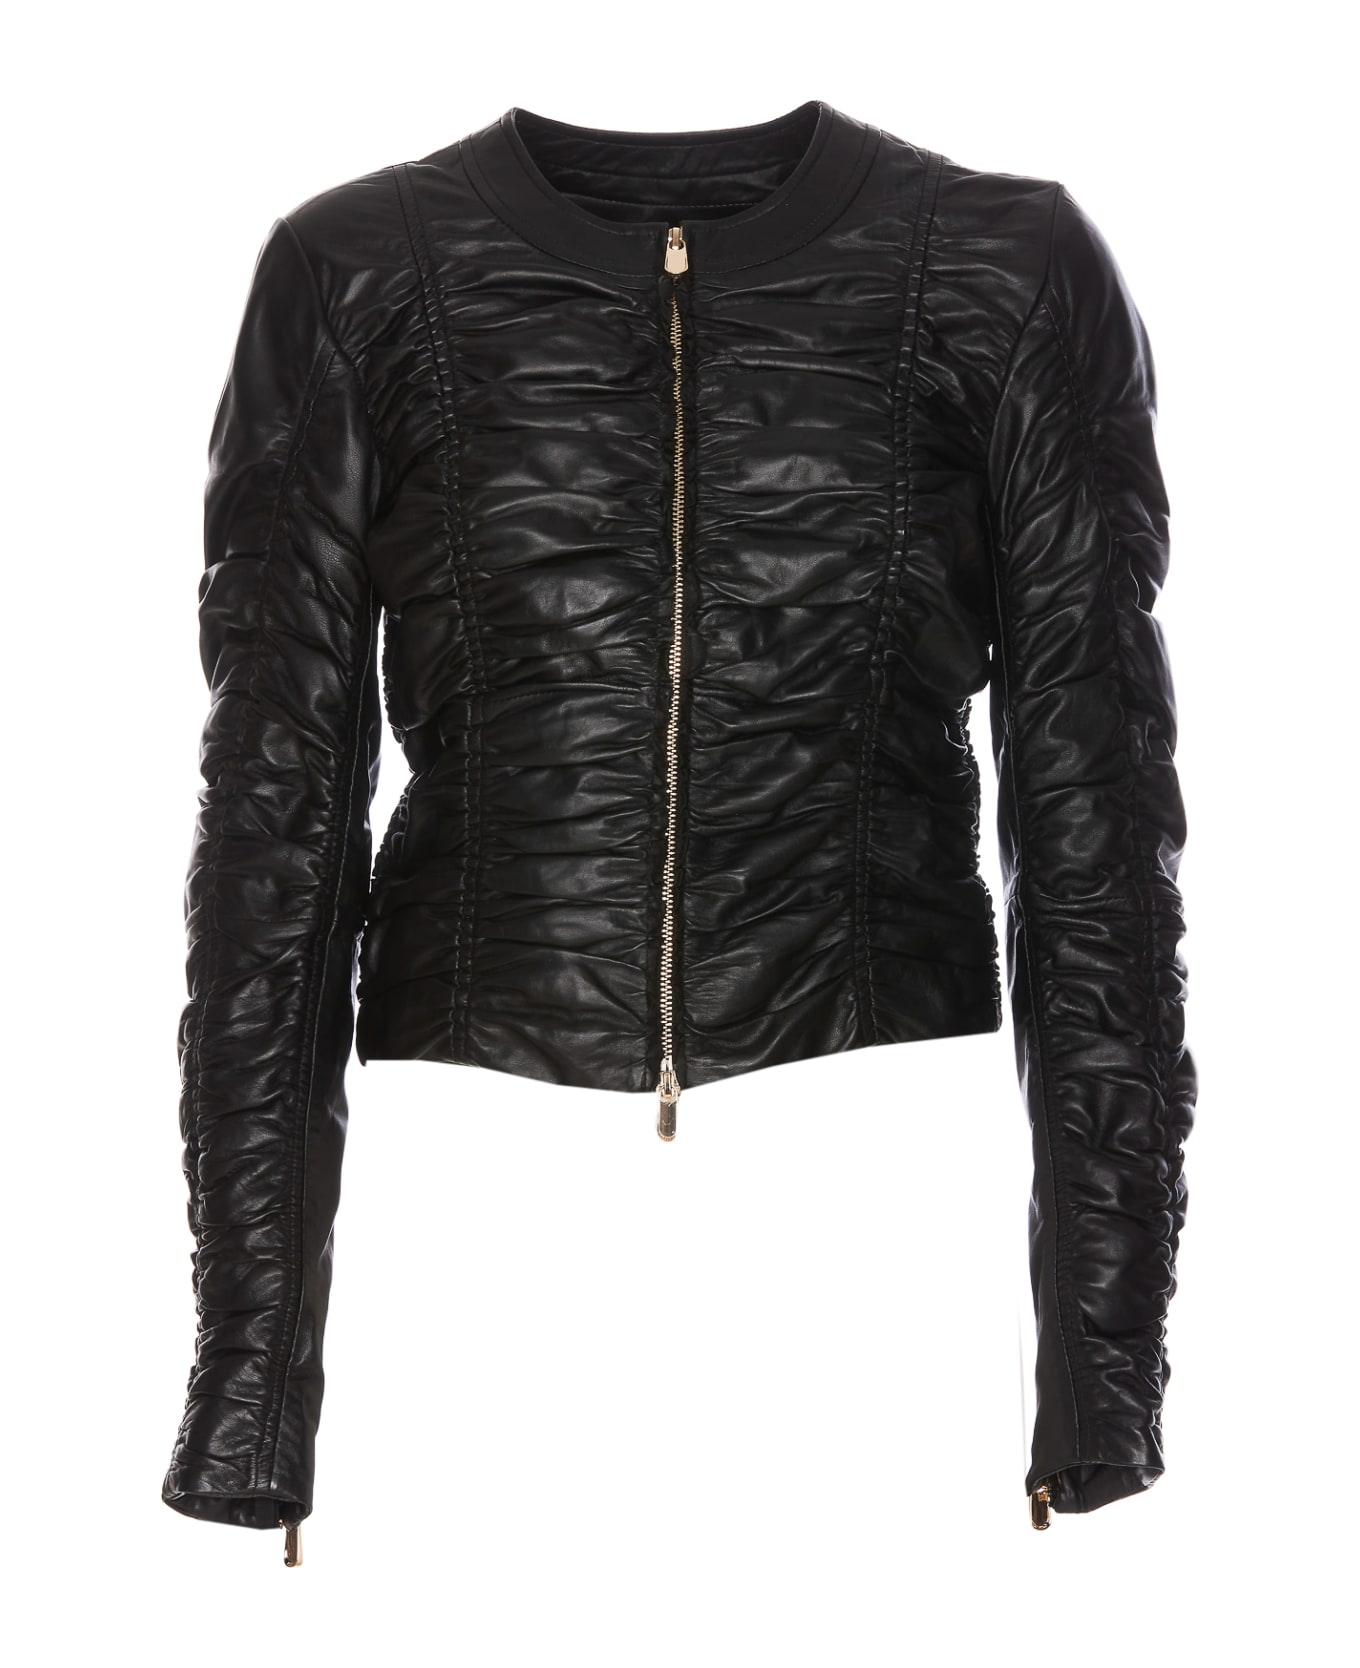 Pinko Ruched Detail Leather Jacket - Black